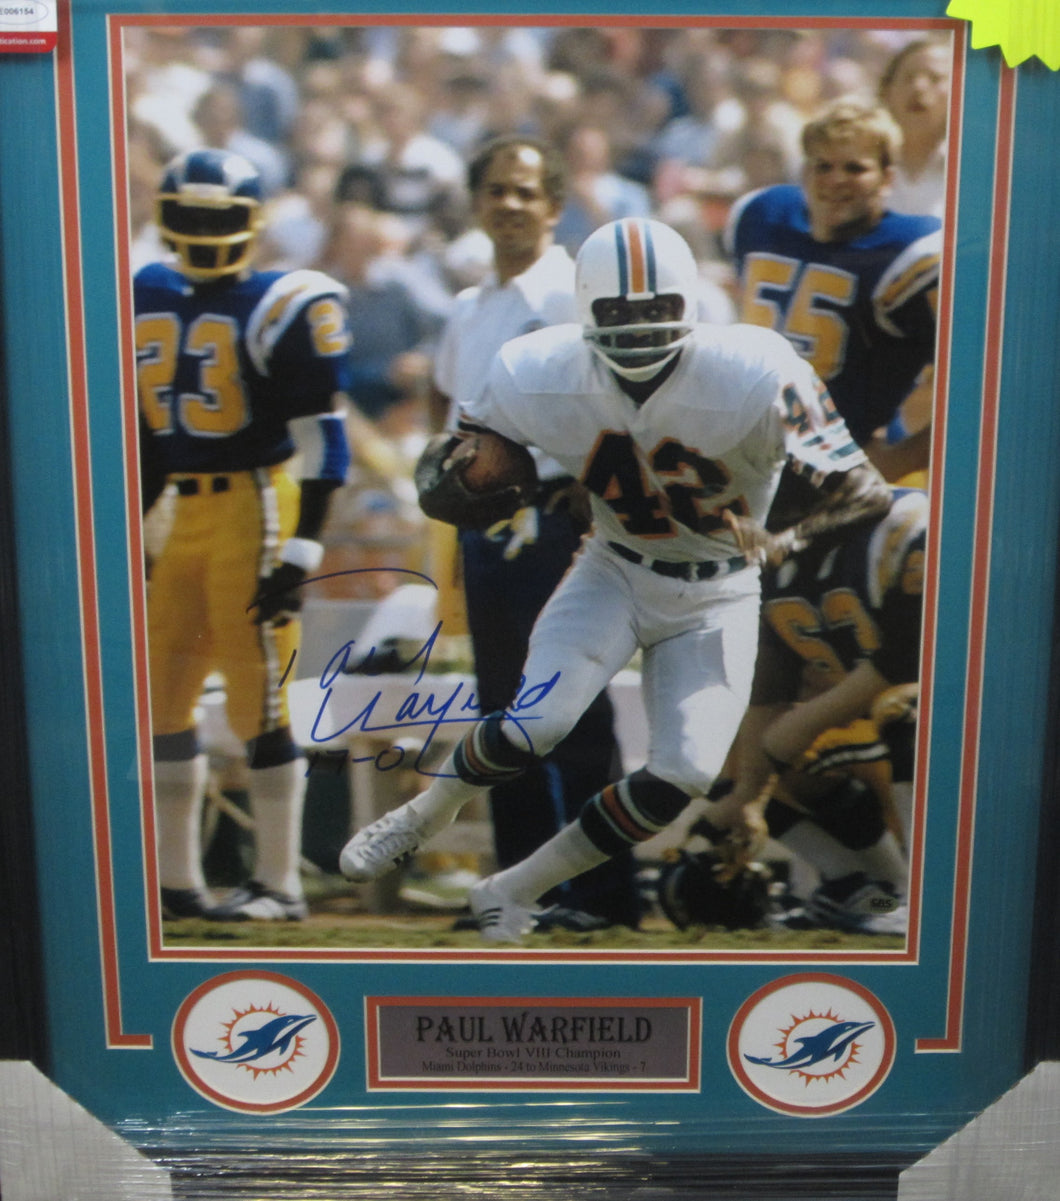 Miami Dolphins Paul Warfield Signed 16x20 Photo with 17-0 Inscription Framed & Matted with CAS COA